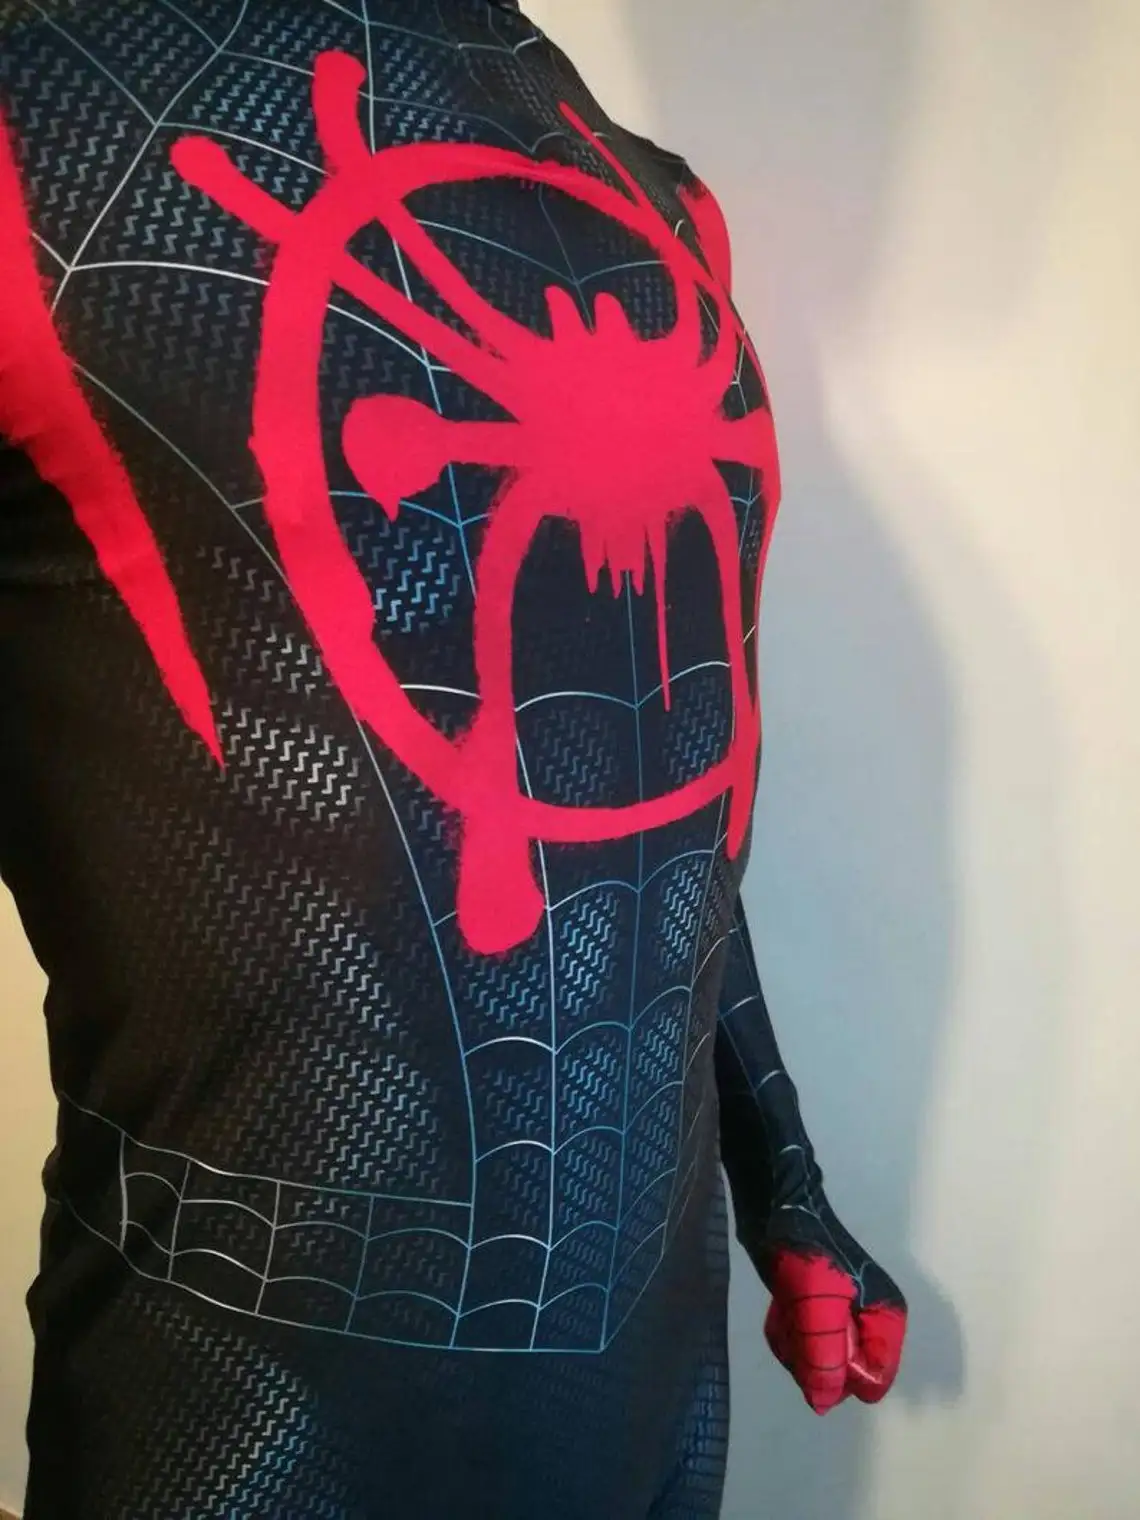 Newest Anime Miles Morales Spiderman COSPLAY Costume 3D Print Into The Verse Superhero Halloween Zentai Bodysuit For Adult Kids images - 6